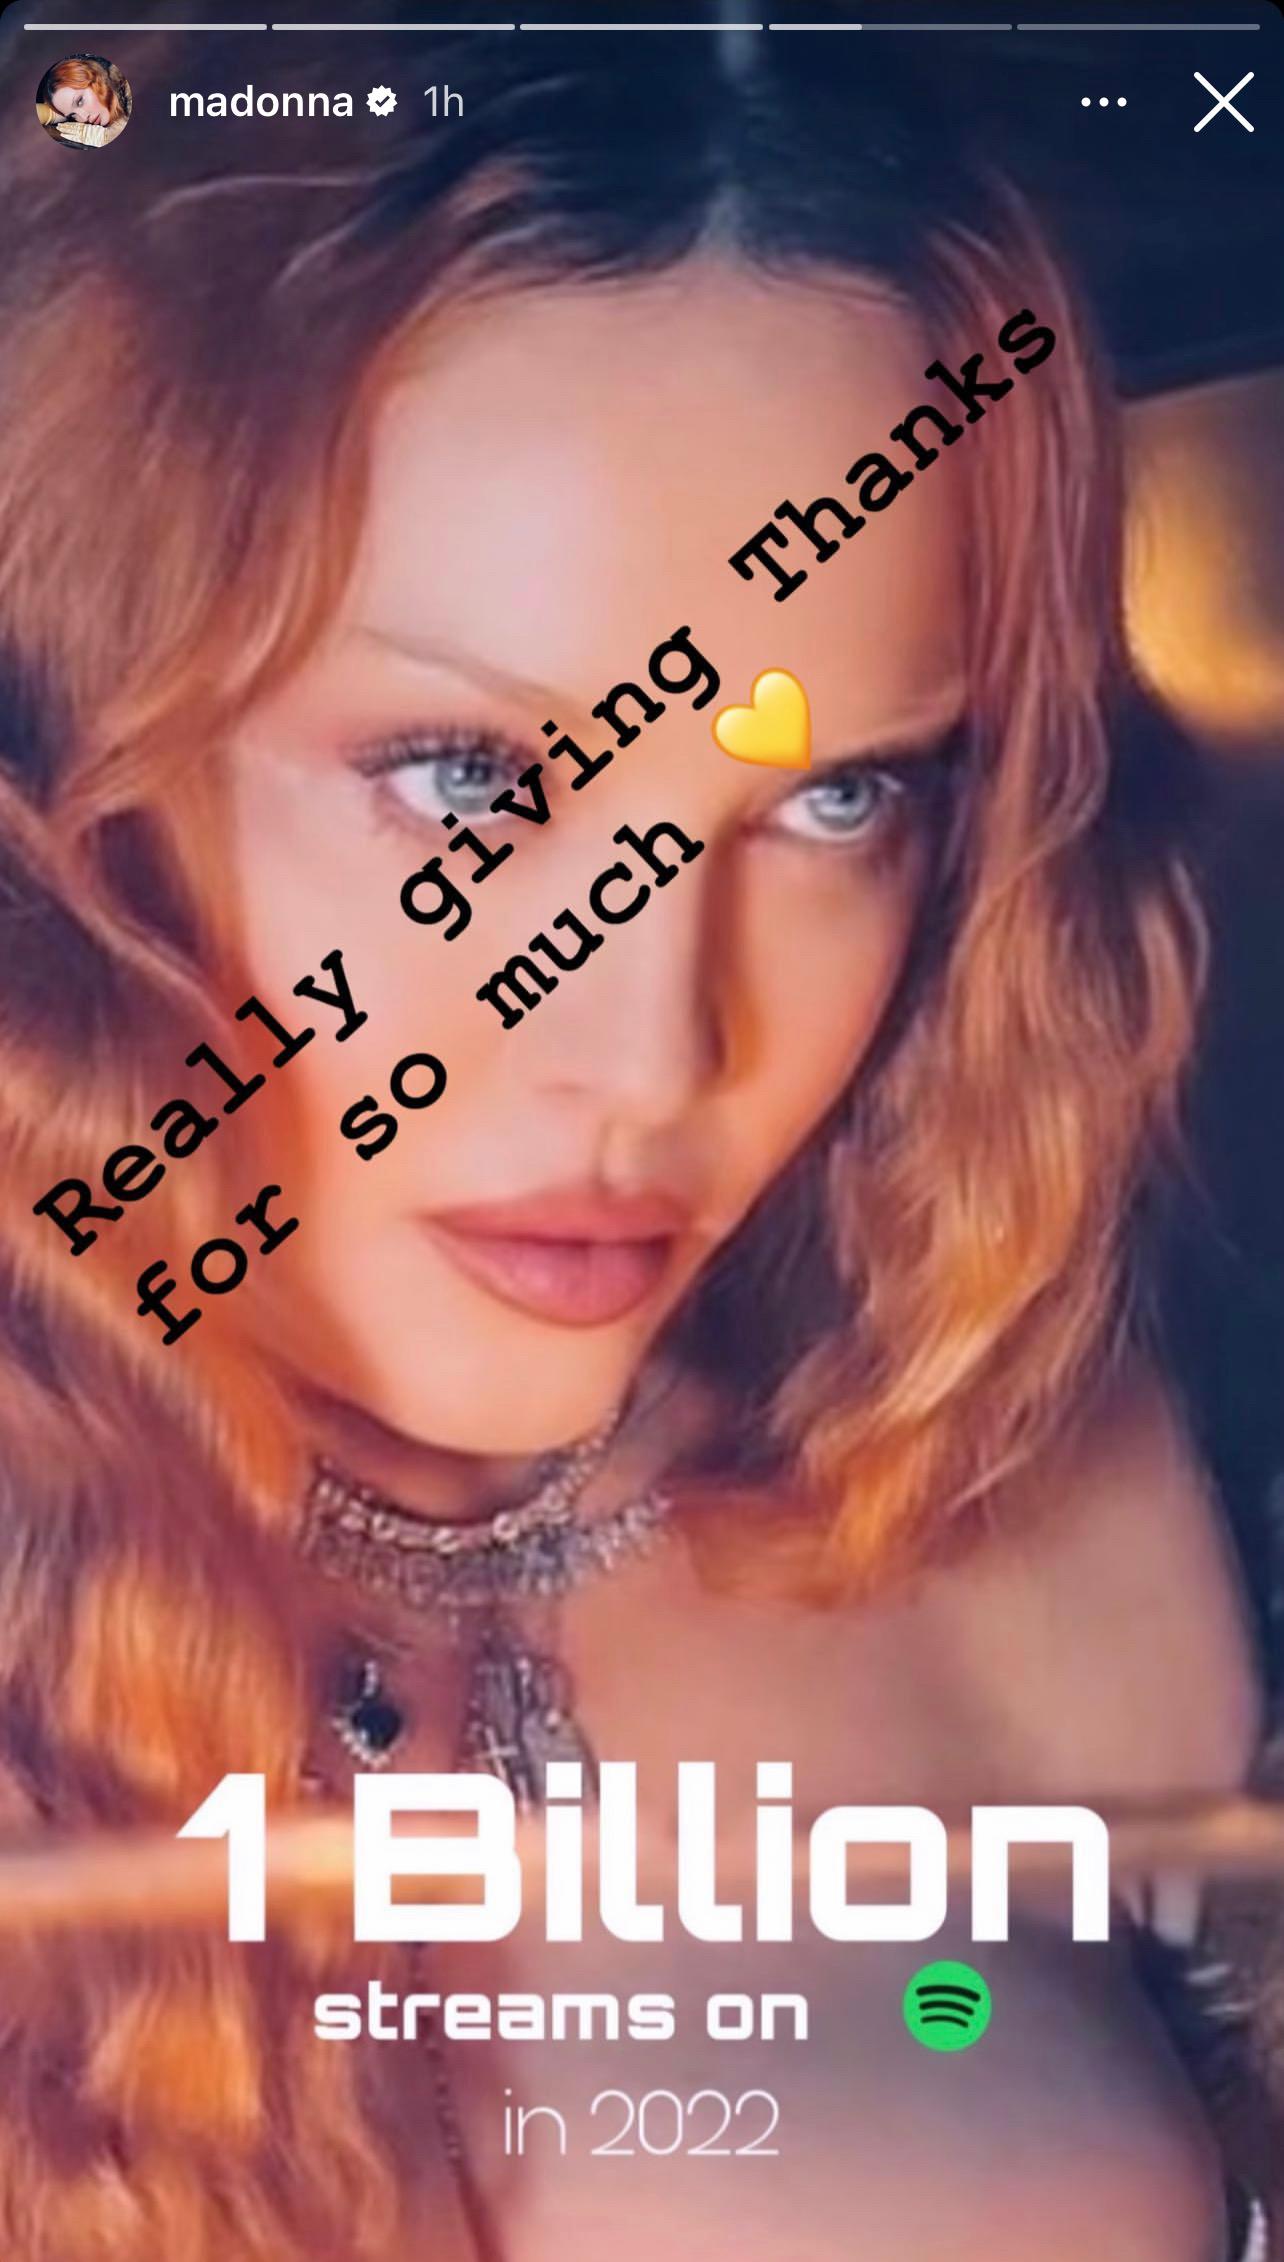 Madonna's post on her Instagram story